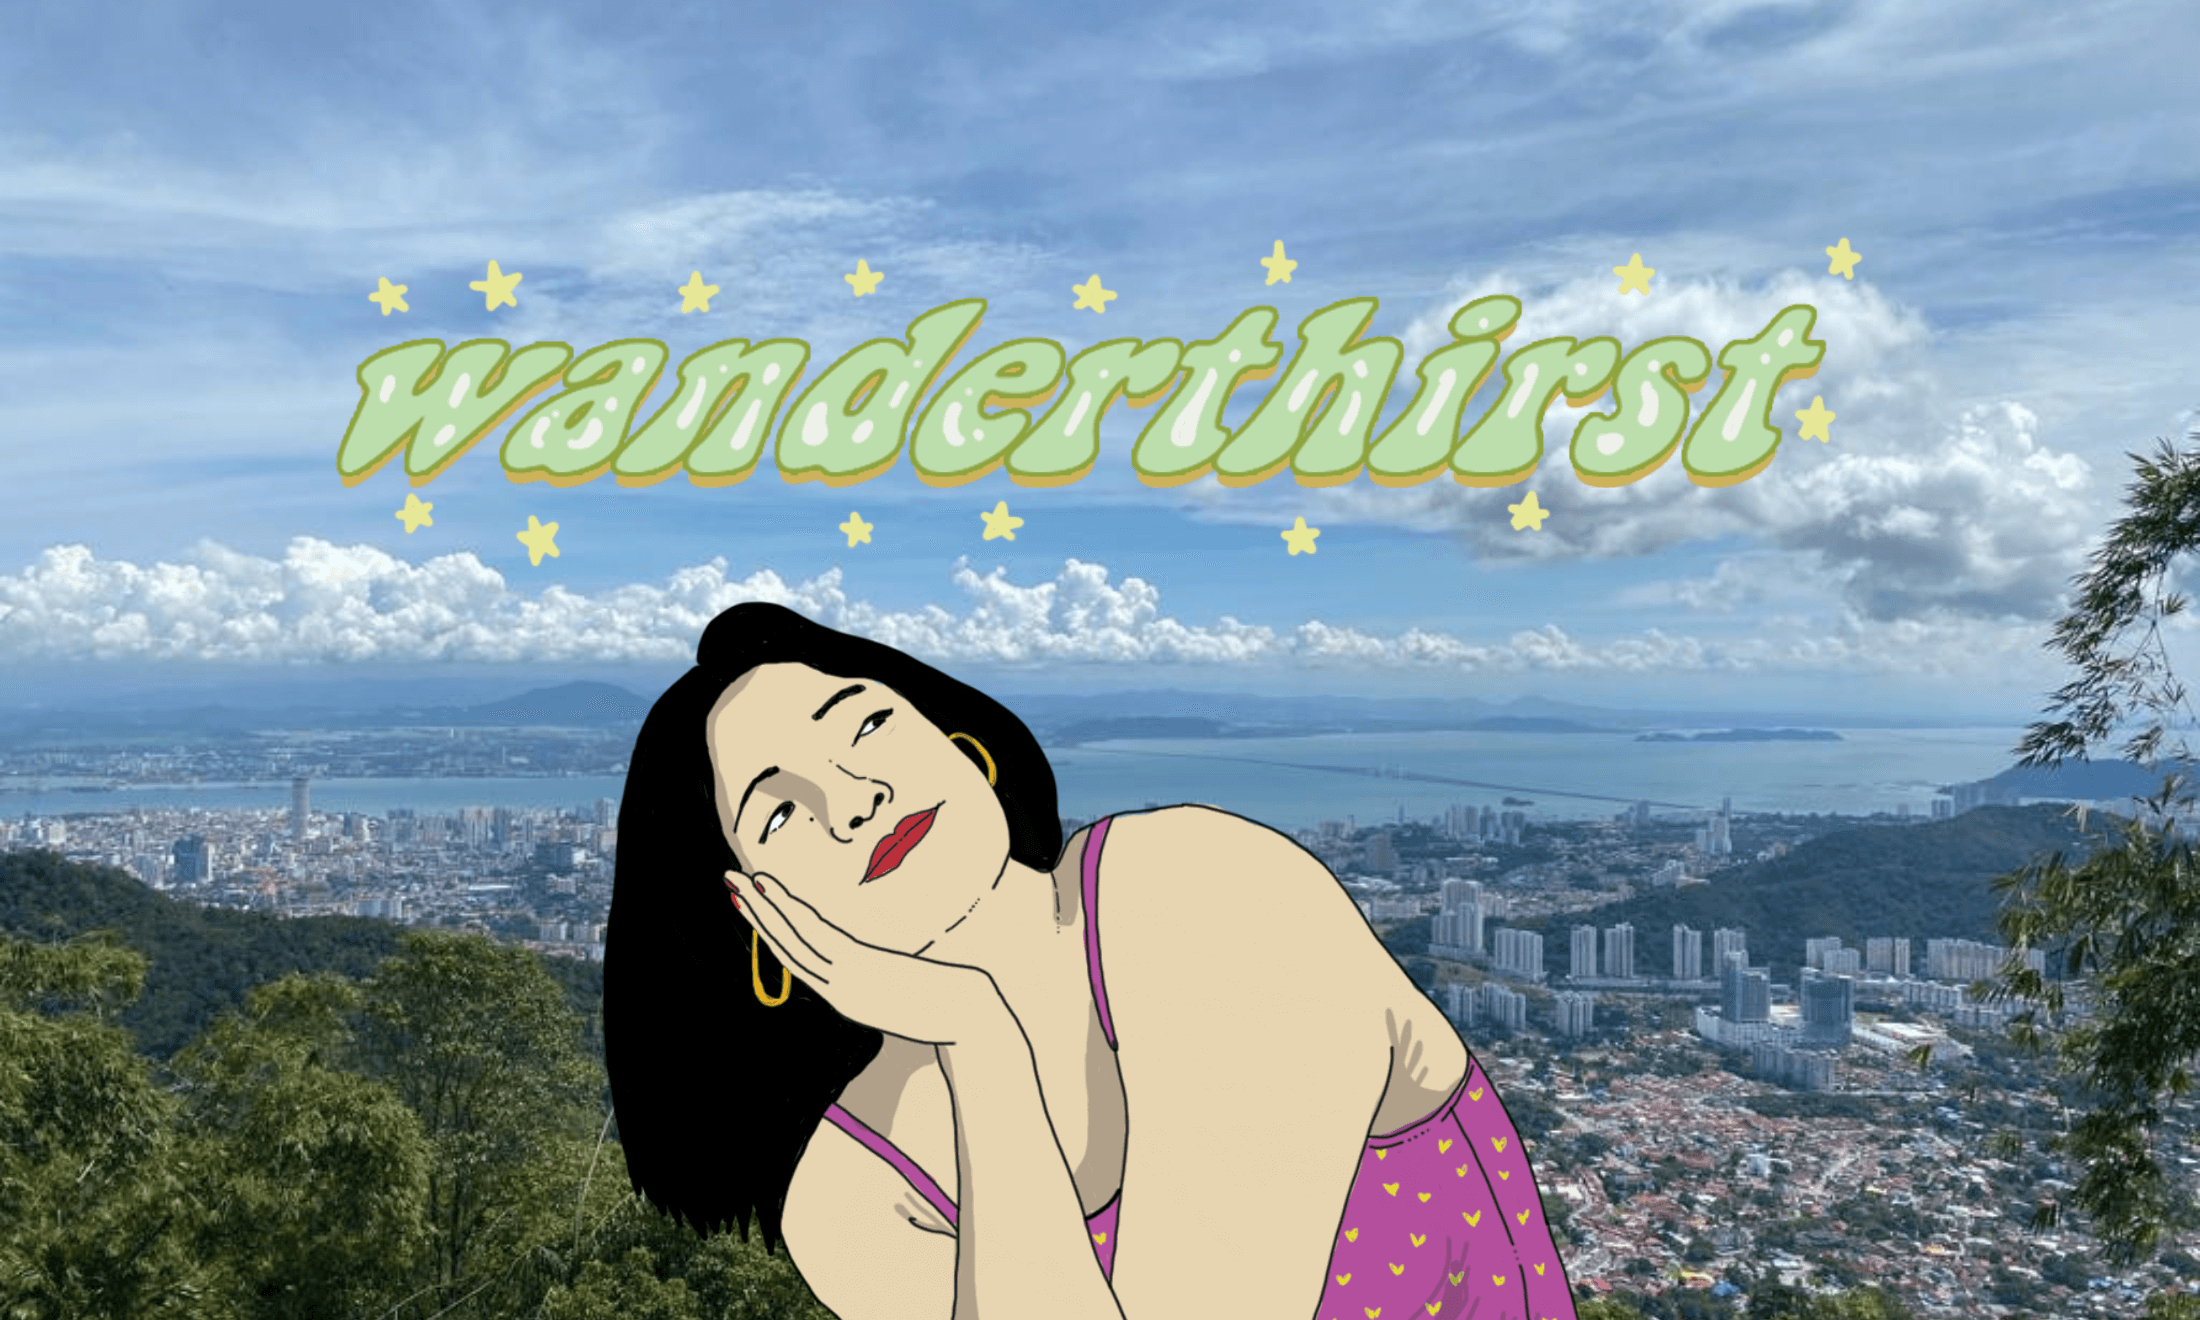 Wanderthirst: returning to Malaysia and my family, I remembered what unconditional love feels like